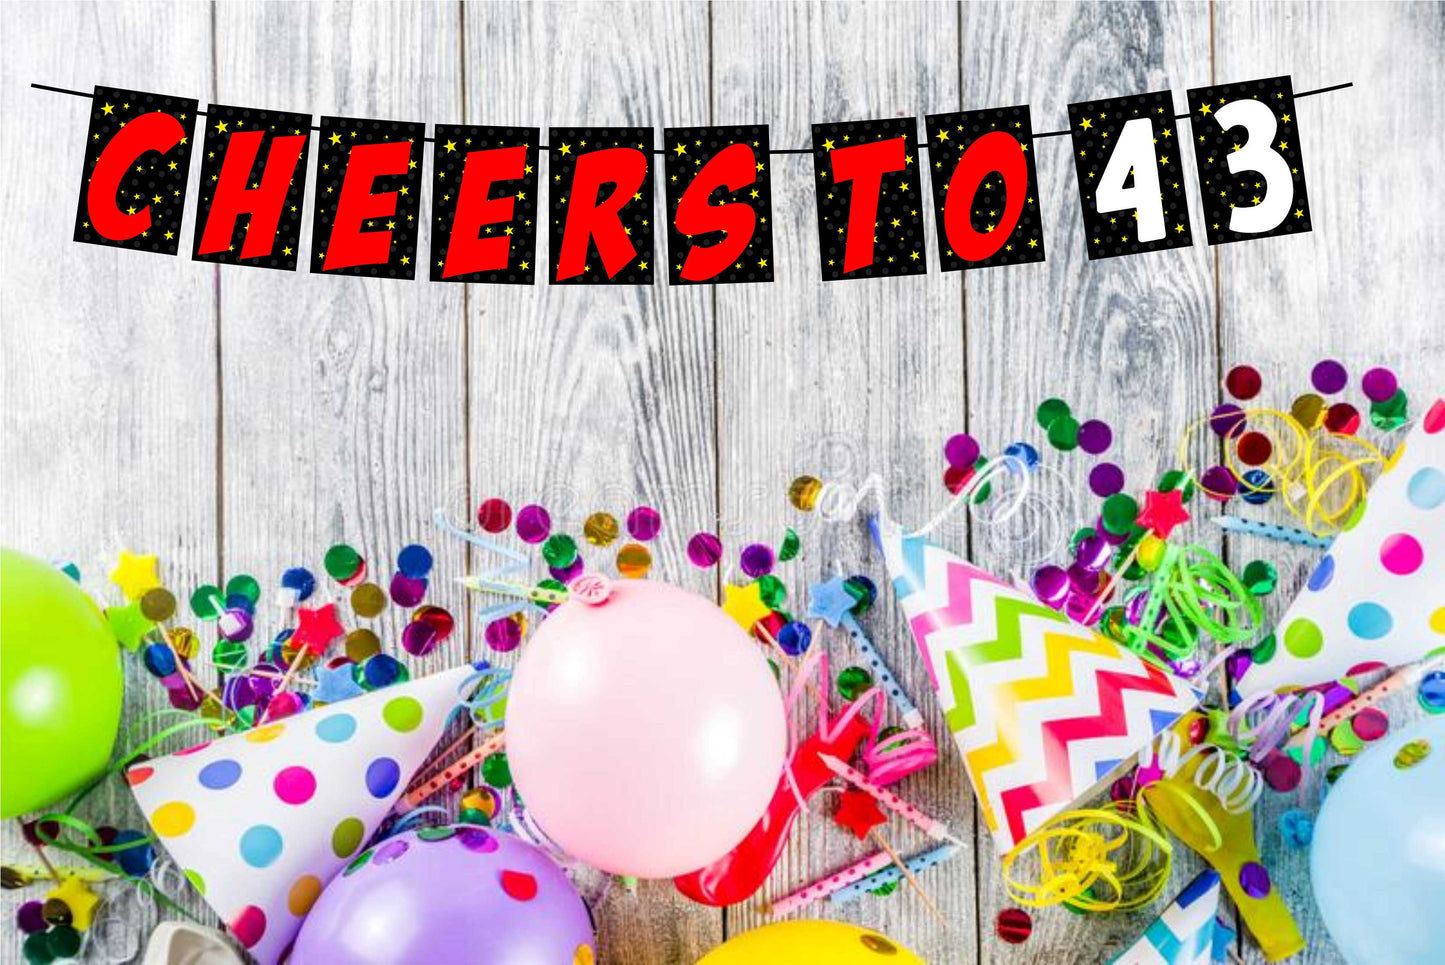 Cheers to 43 Birthday Banner for Photo Shoot Backdrop and Theme Party